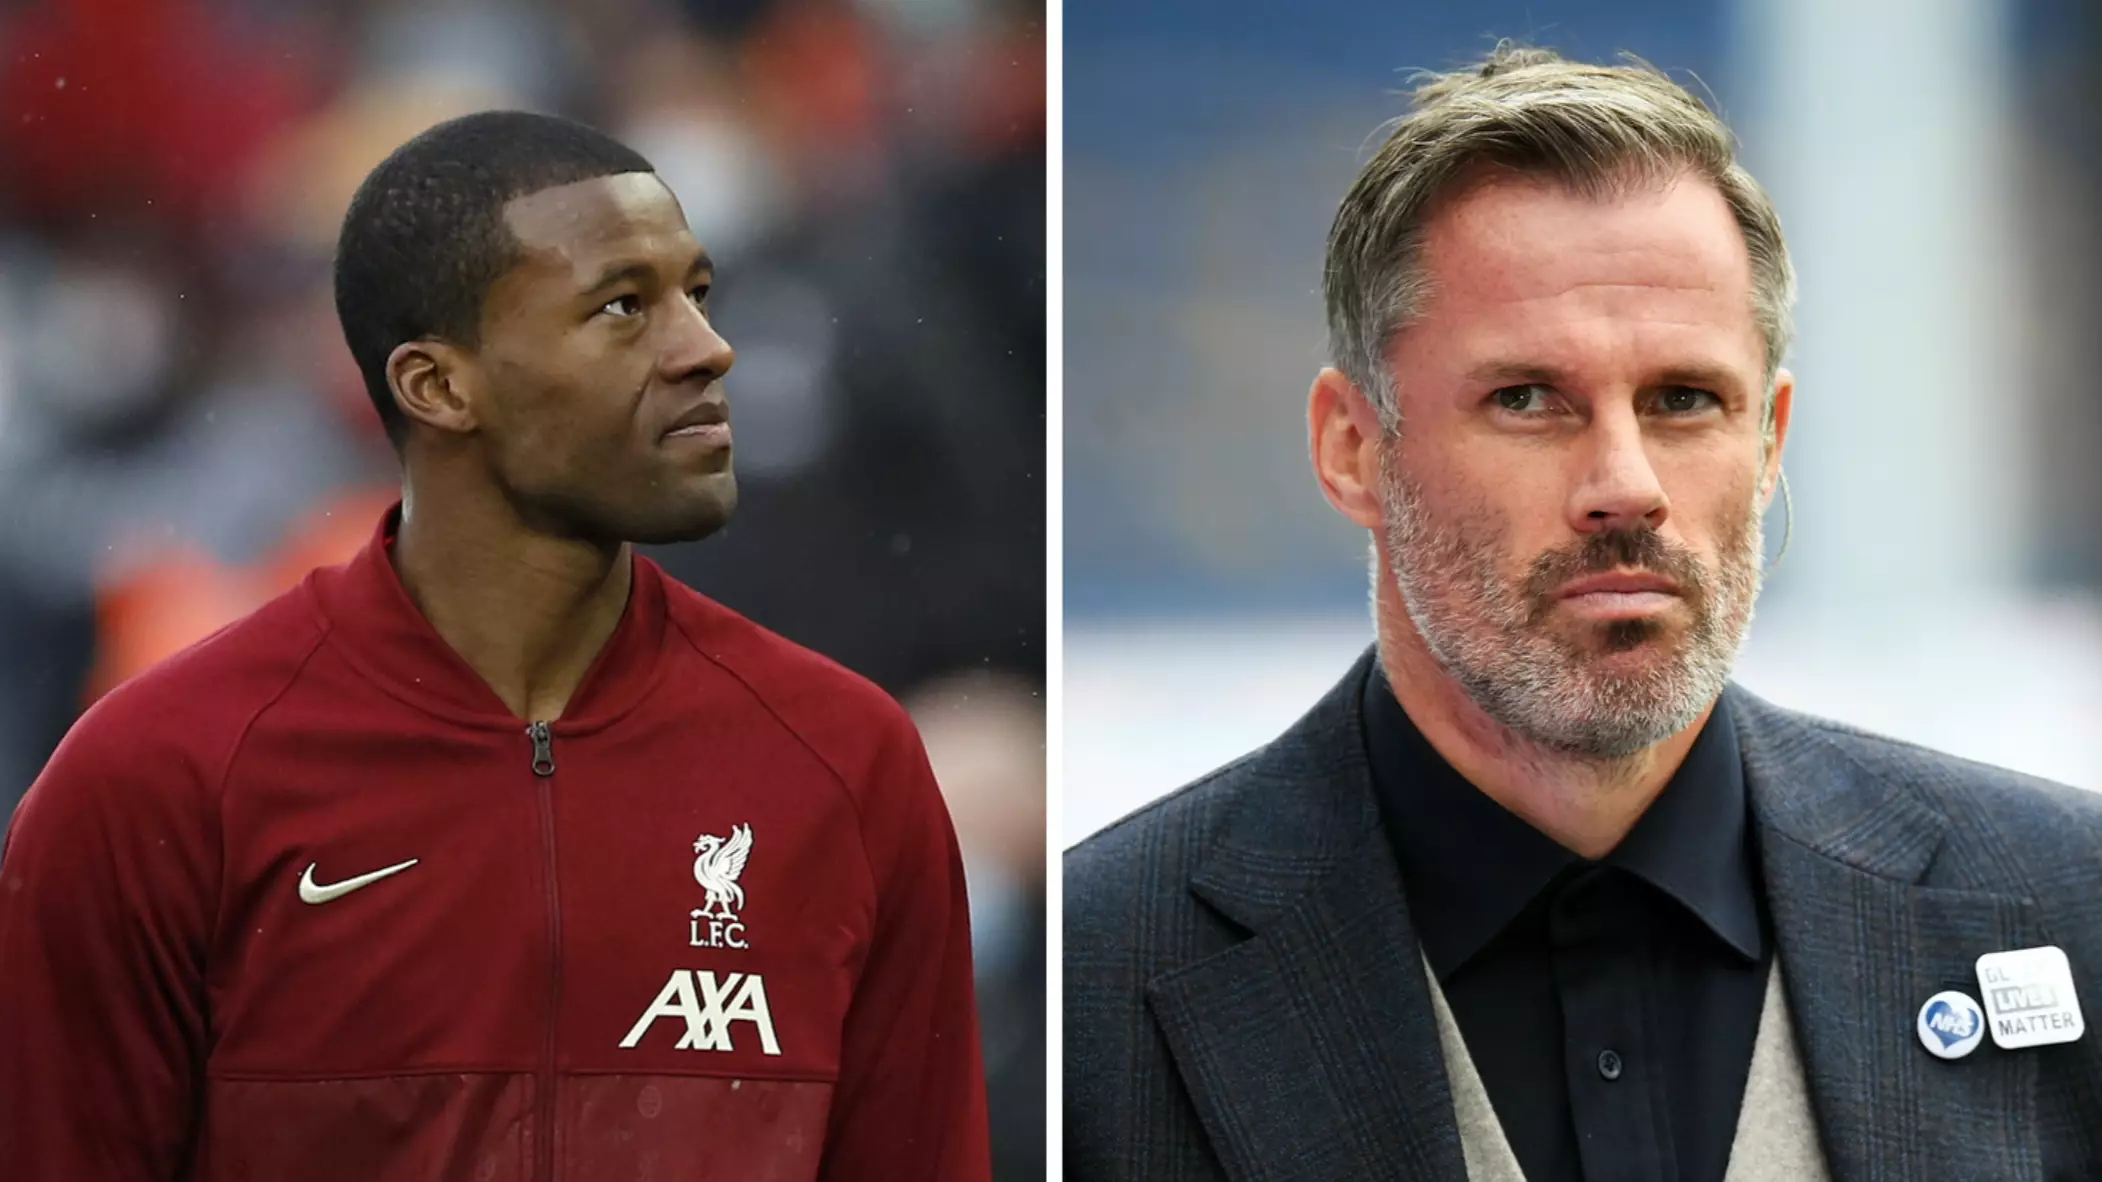 Jamie Carragher Ruthlessly Hits Out At Gini Wijnaldum For His Reasoning Behind Liverpool Exit 